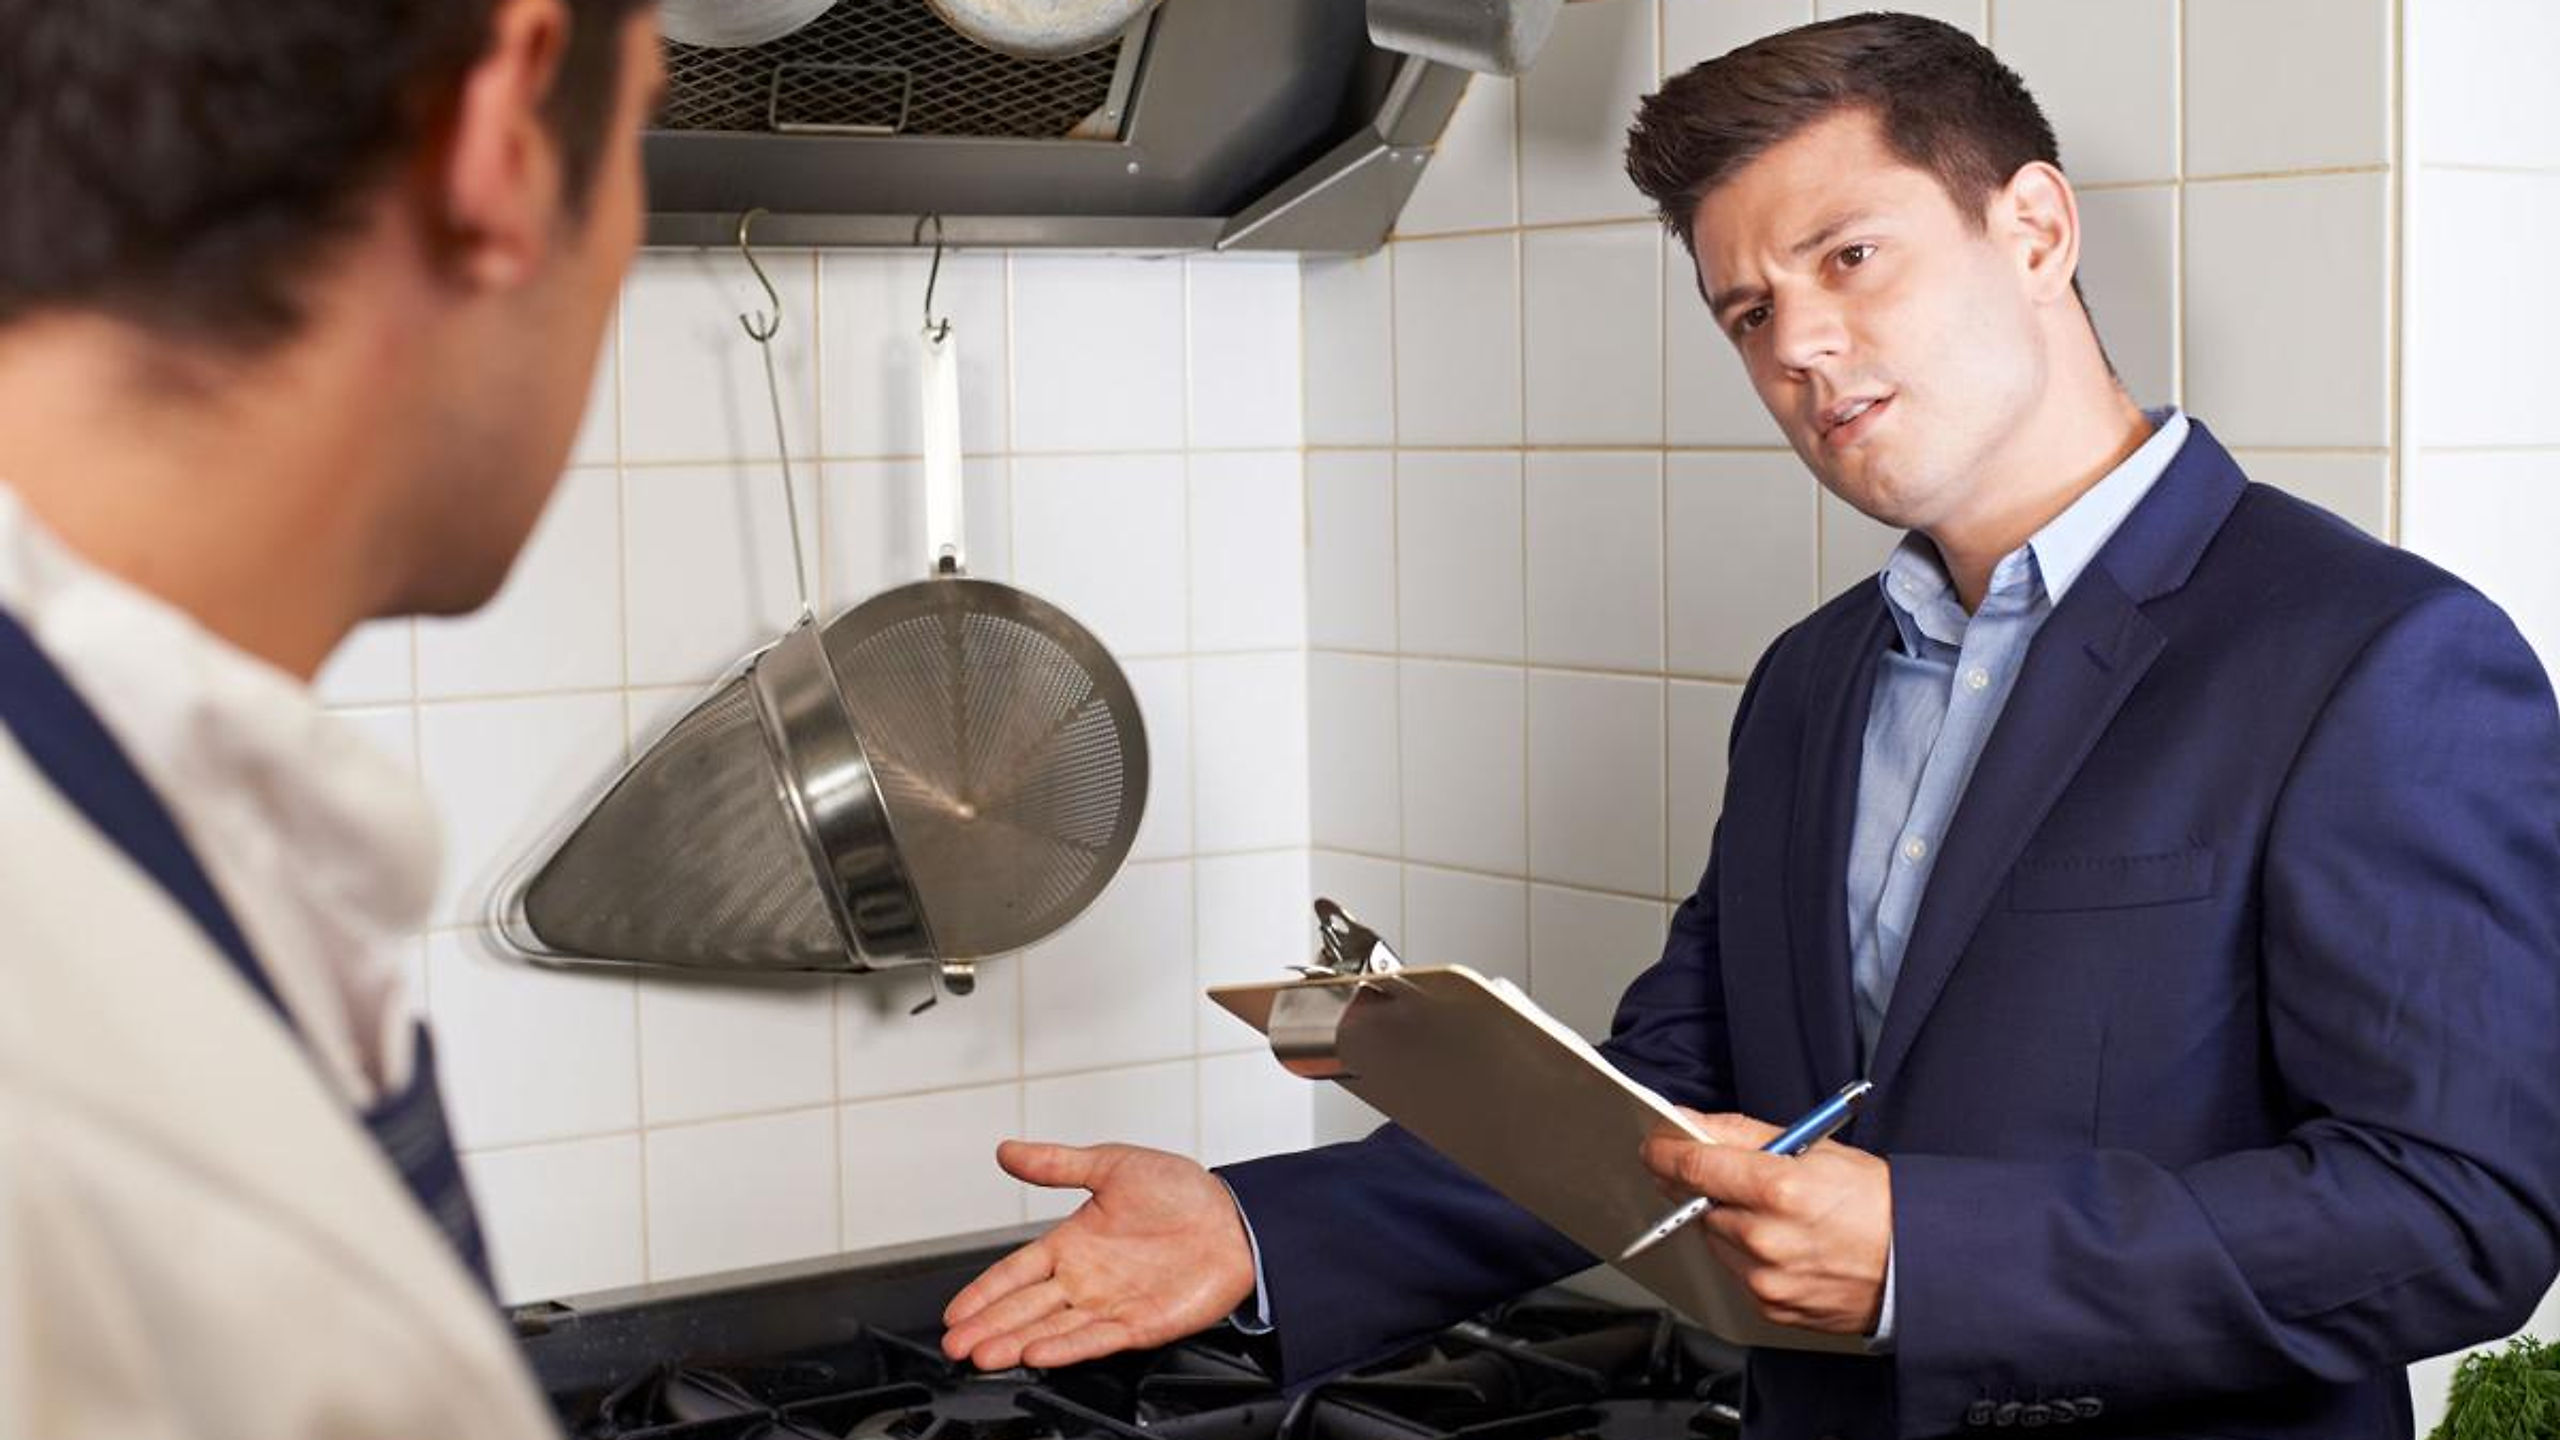 Poor Restaurant Inspections: What's the cost?